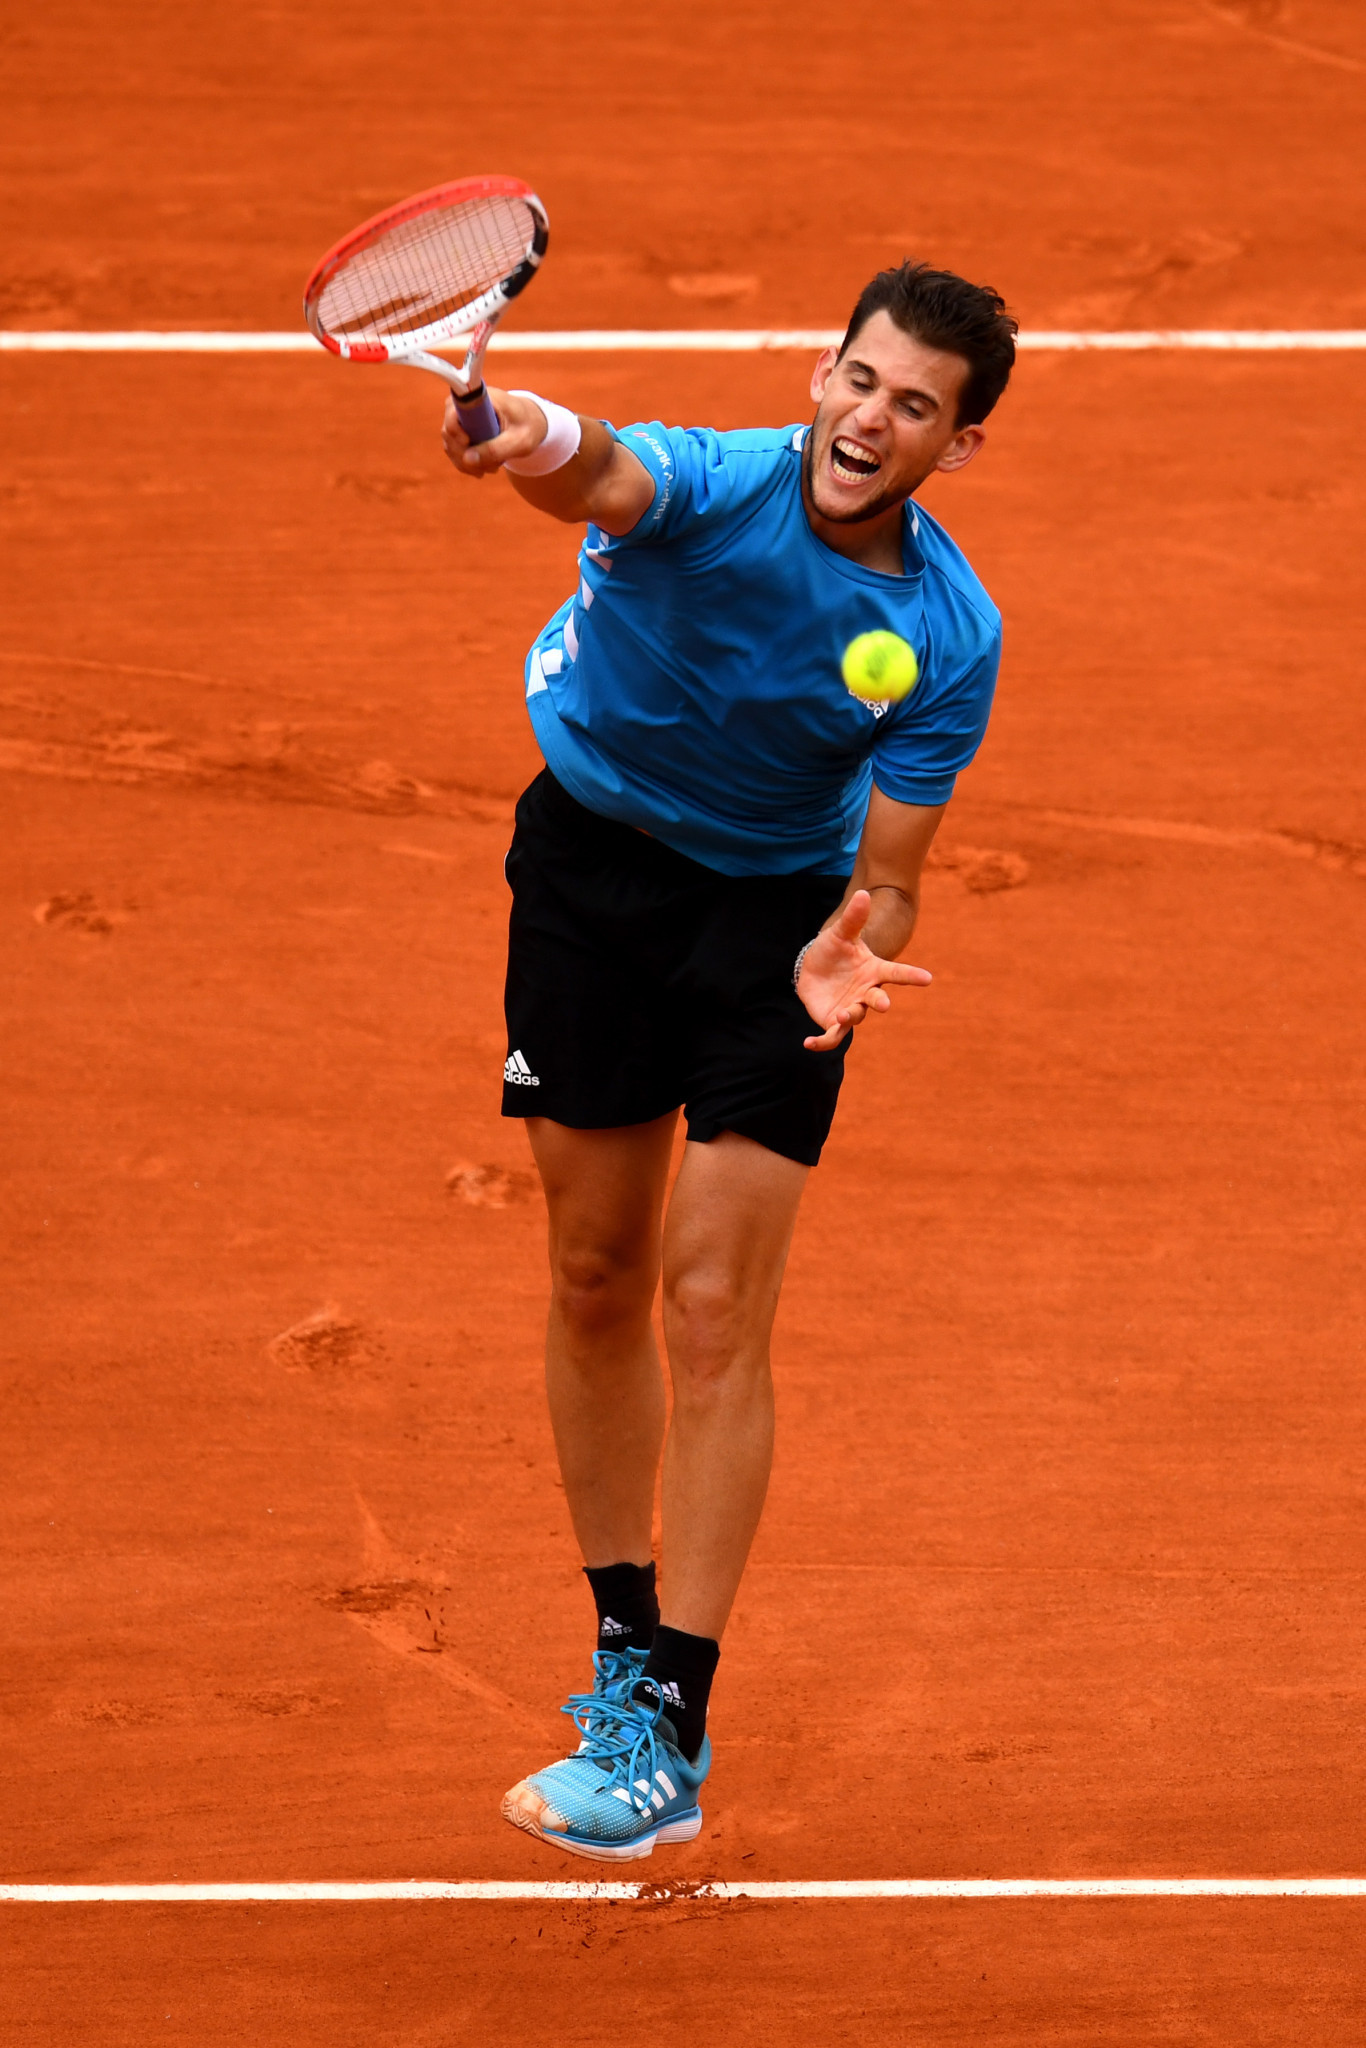 Dominic Thiem thunders down a smash during the French Open final ©Getty Images